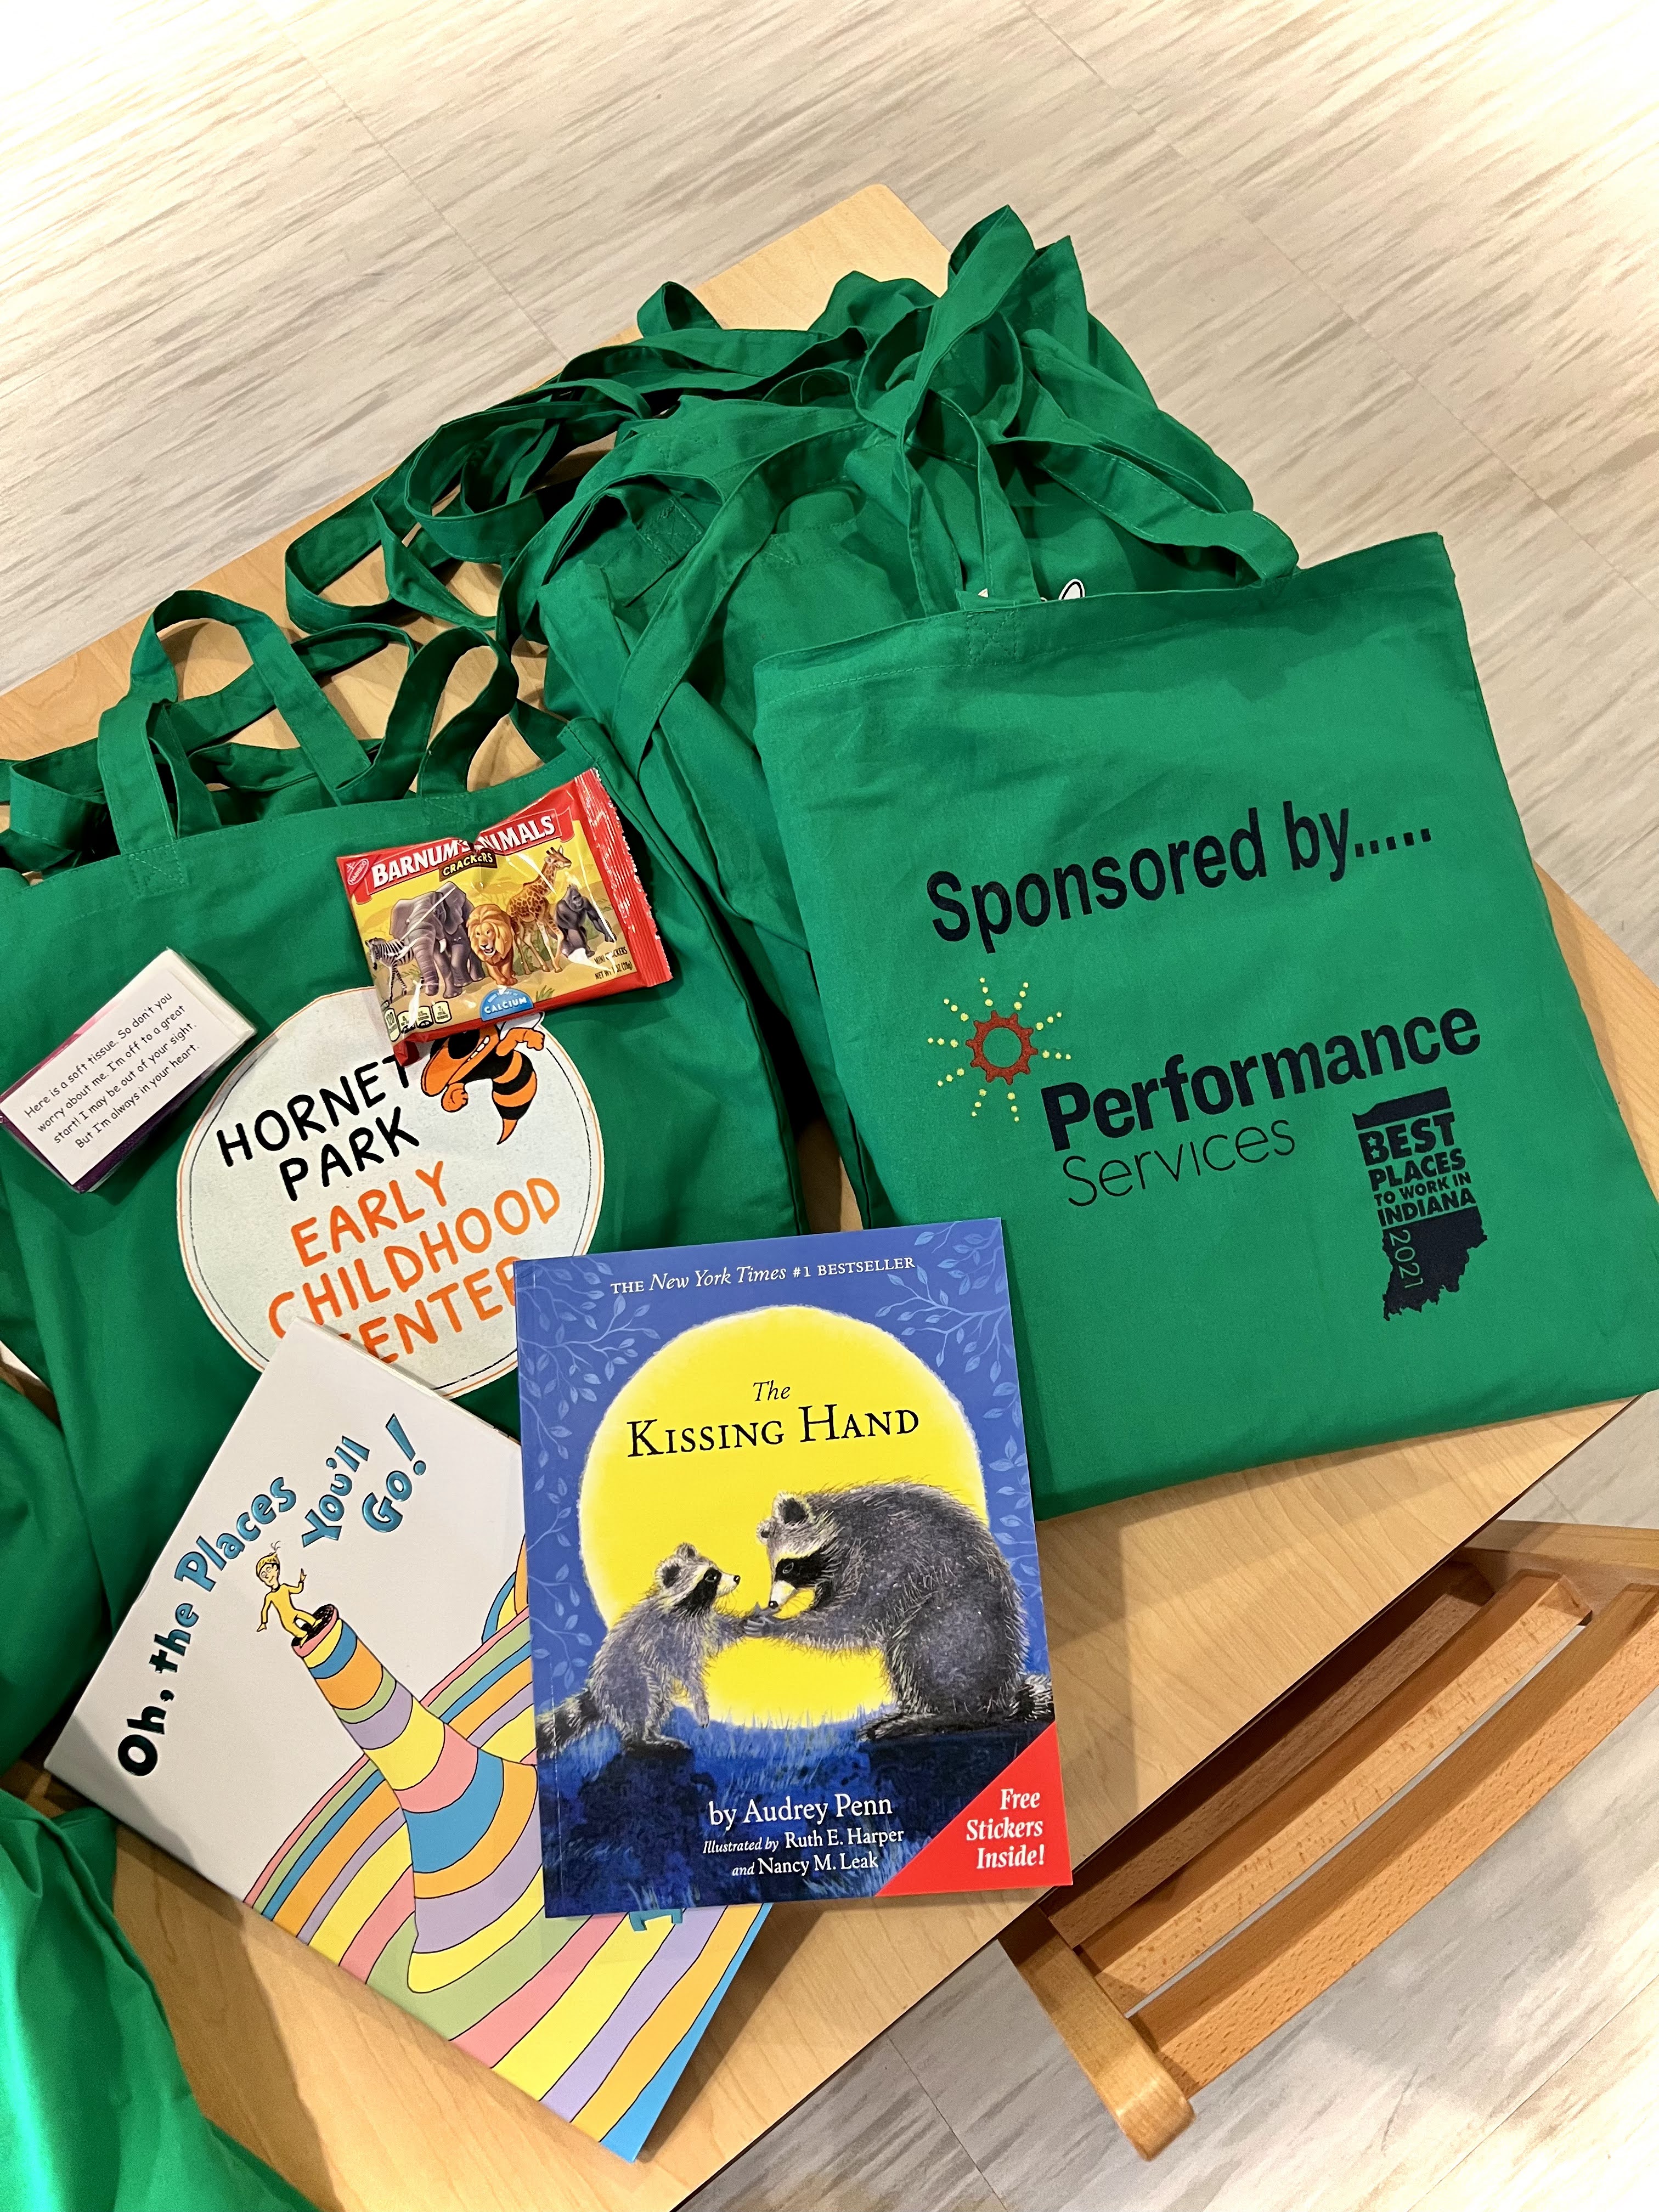 bags for the open house and a book